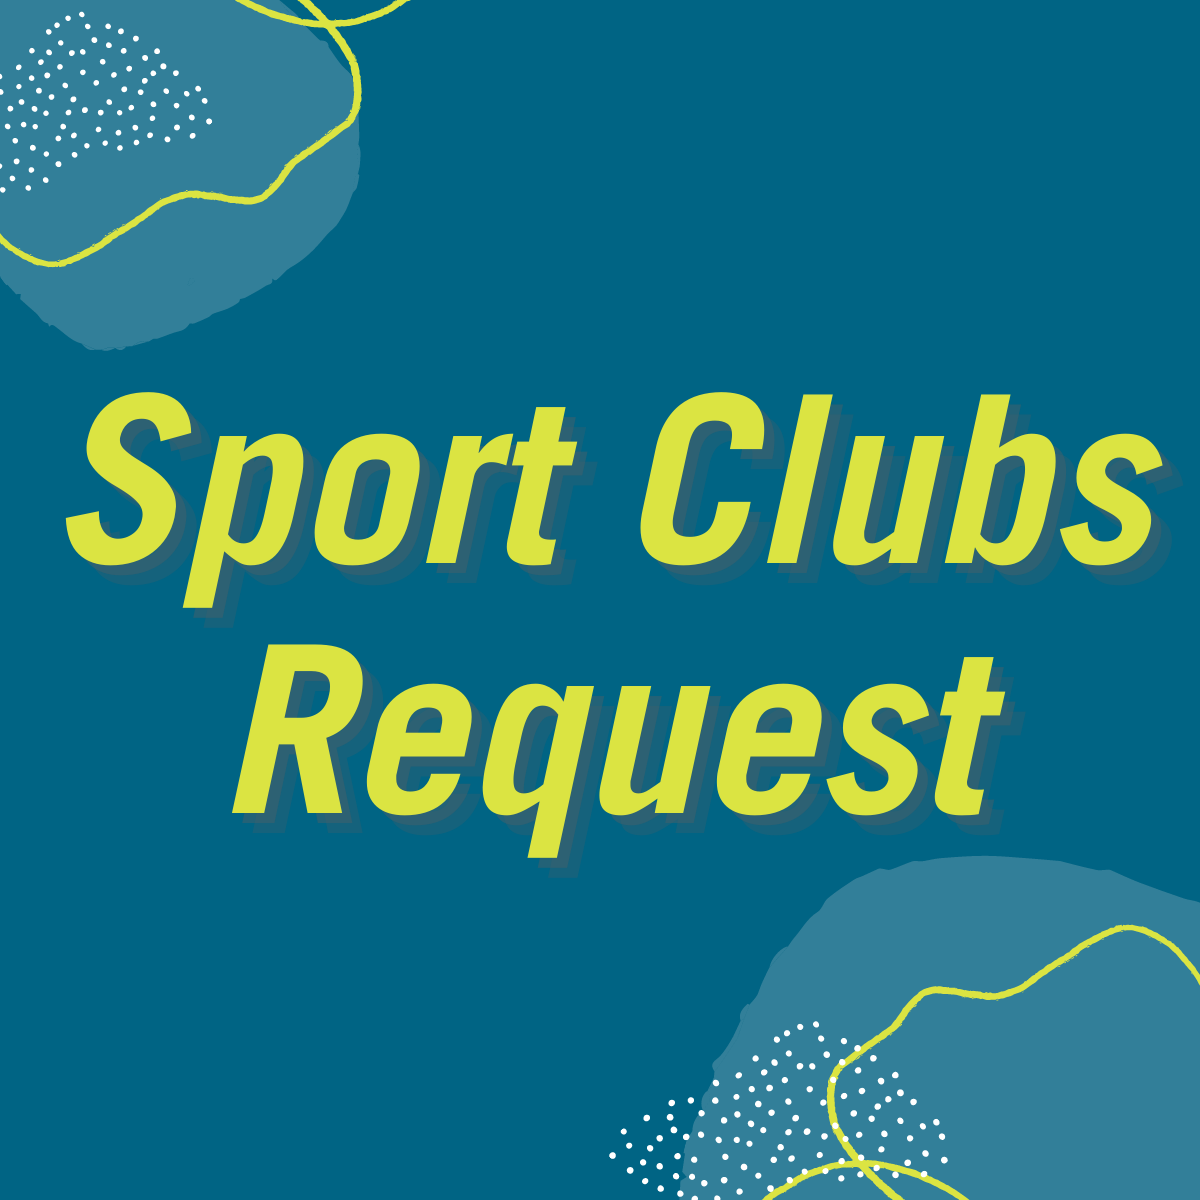 Sports Clubs Request